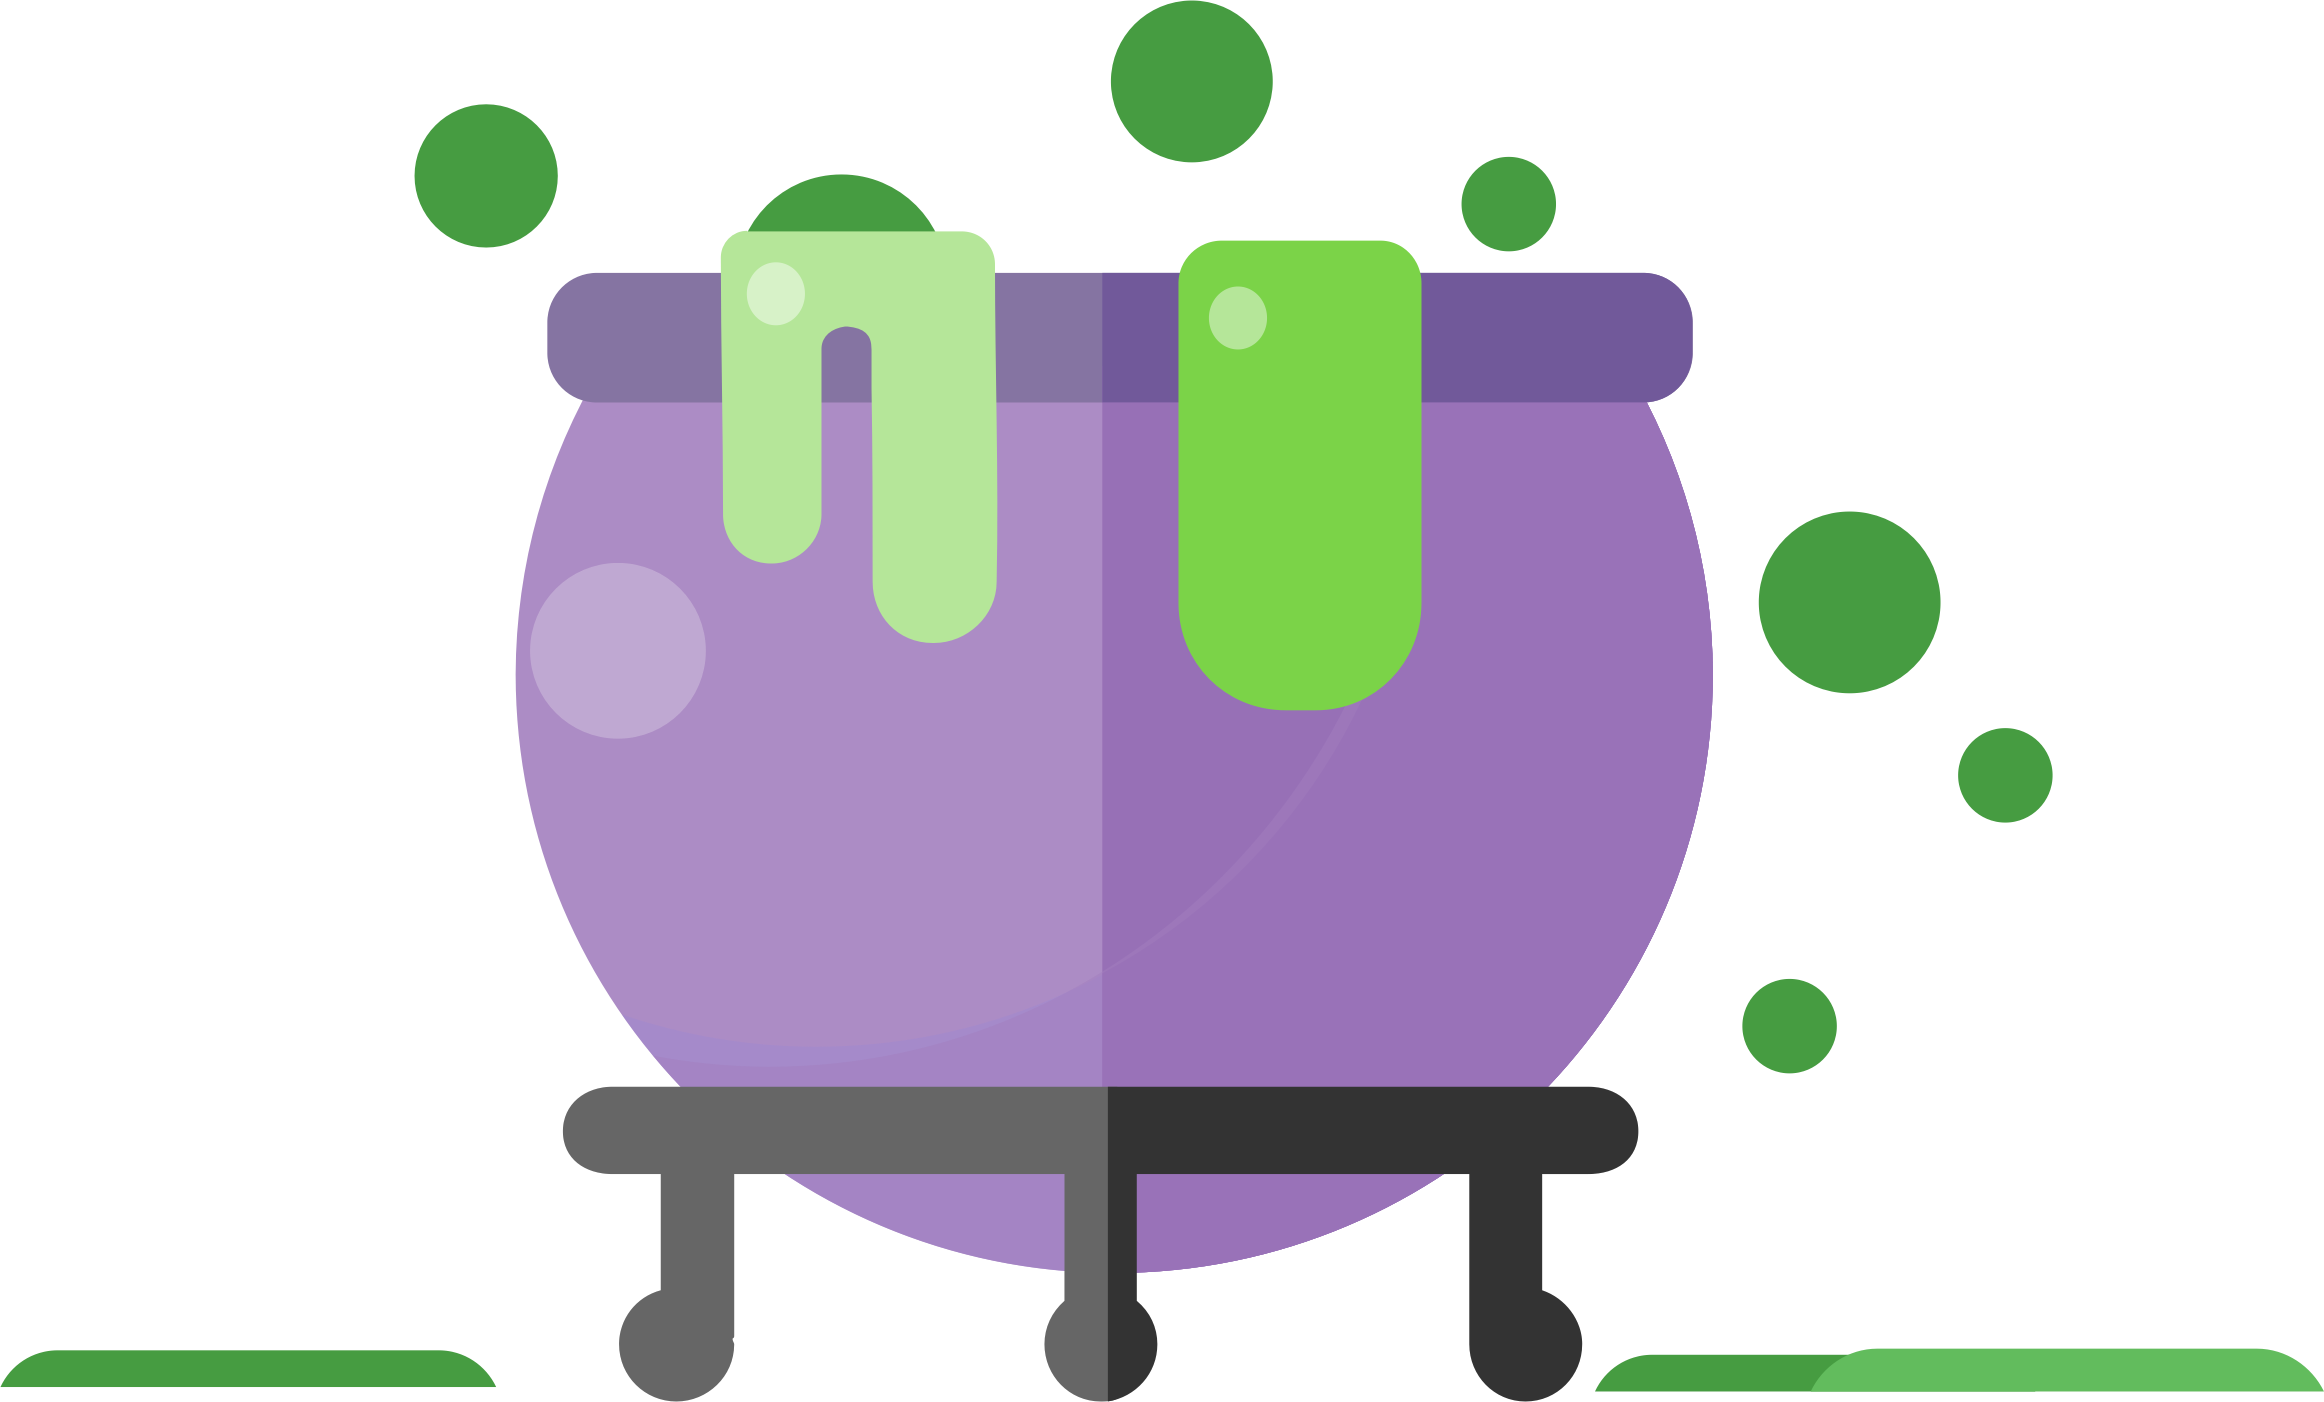 A Purple Cauldron With Green Slime On Top